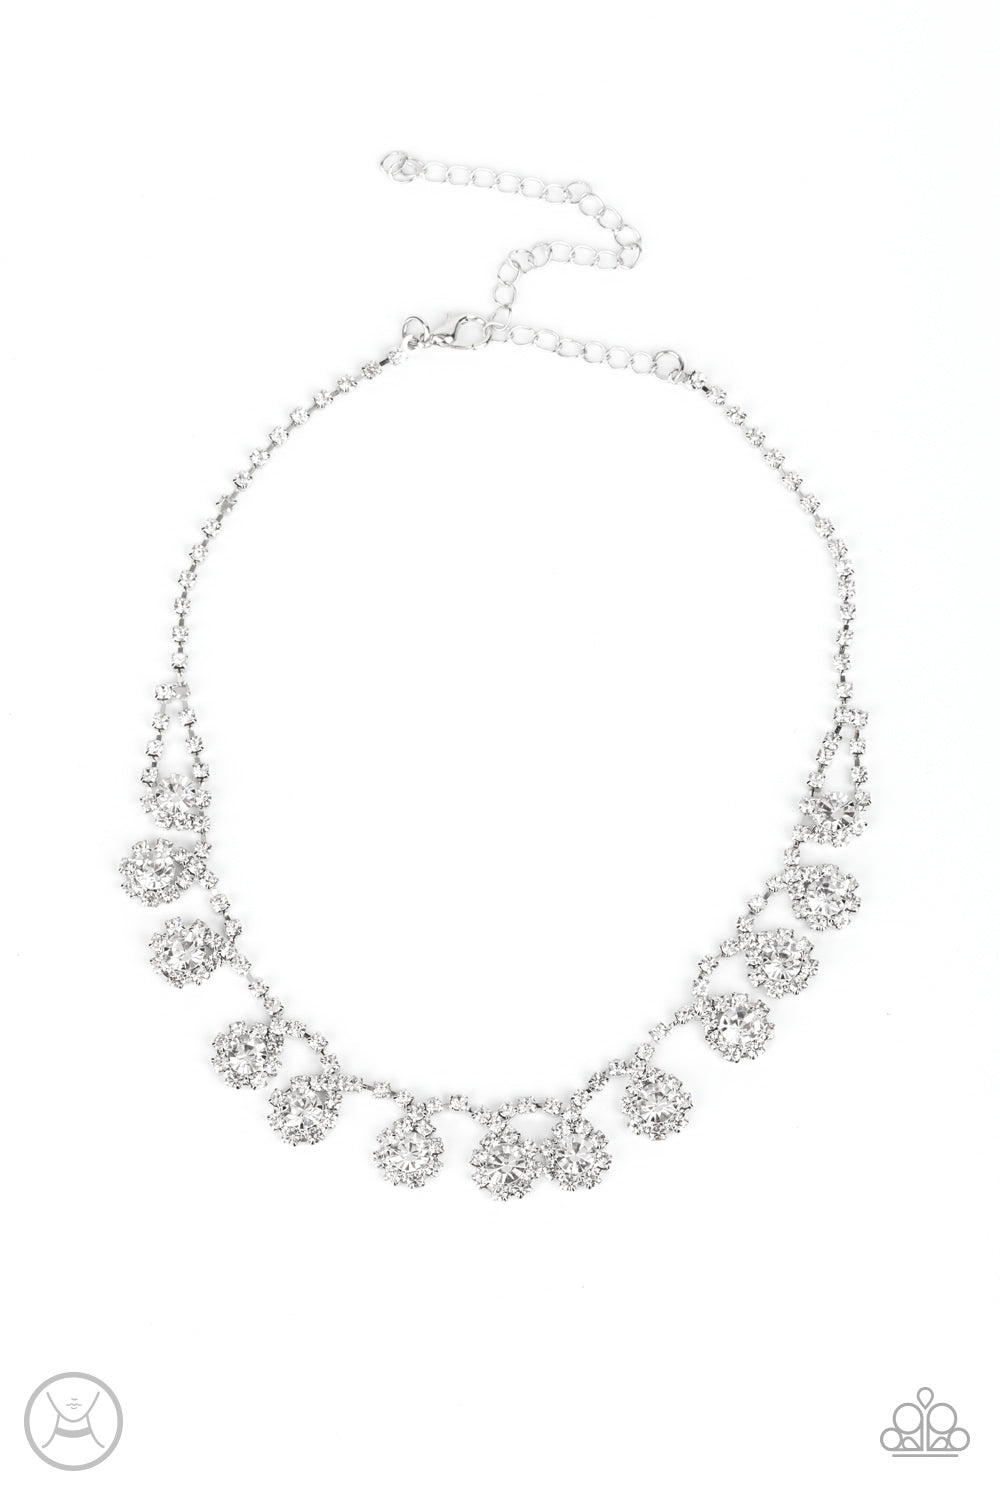 Paparazzi Princess Prominence White Short Necklace - Life Of The Party Exclusive November 2021